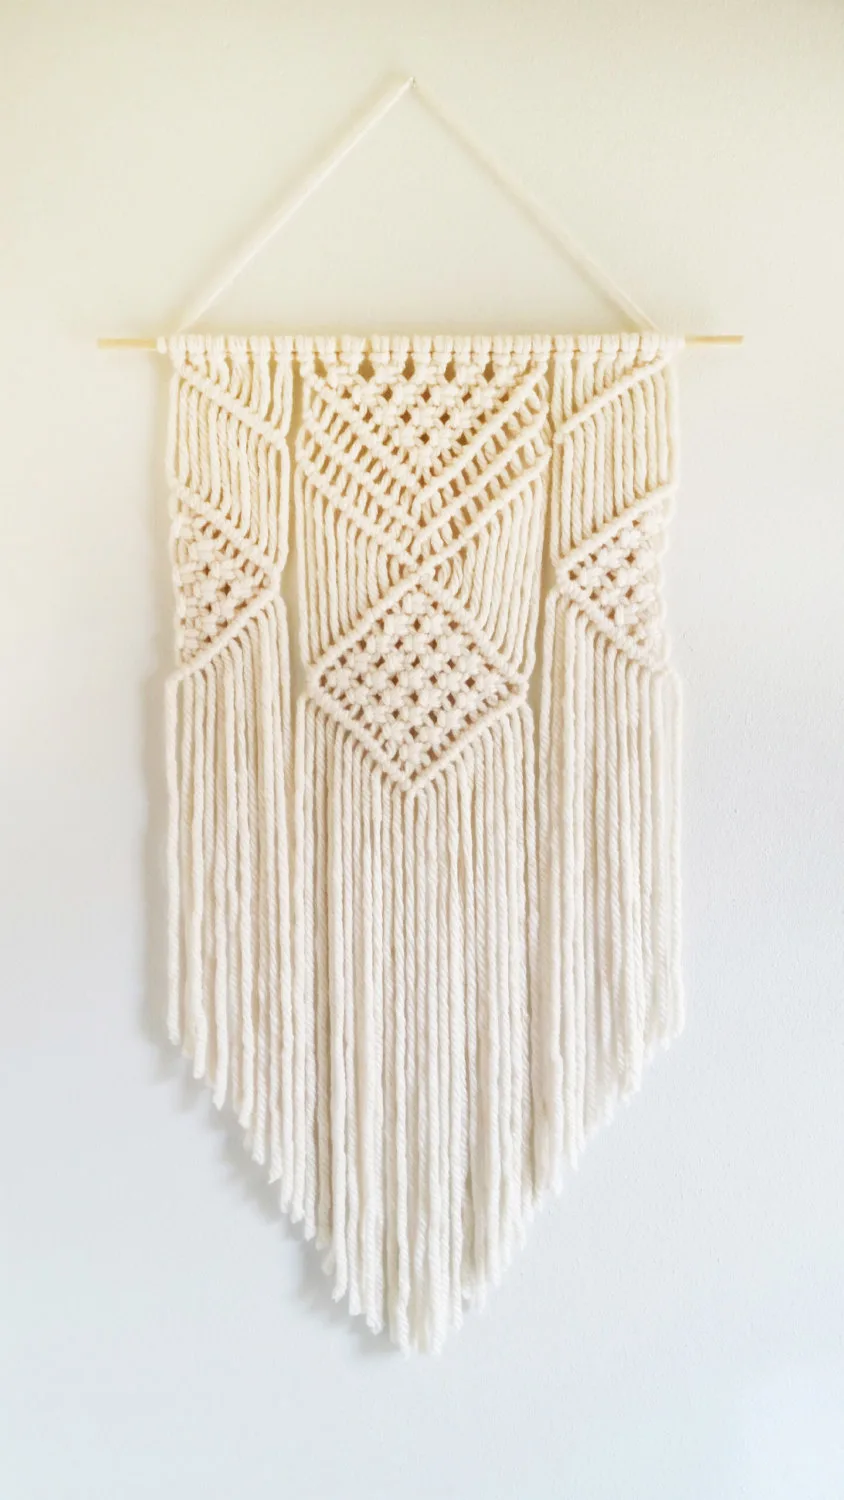 Macrame Wall Hanging from Creative Chic Shop on Etsy